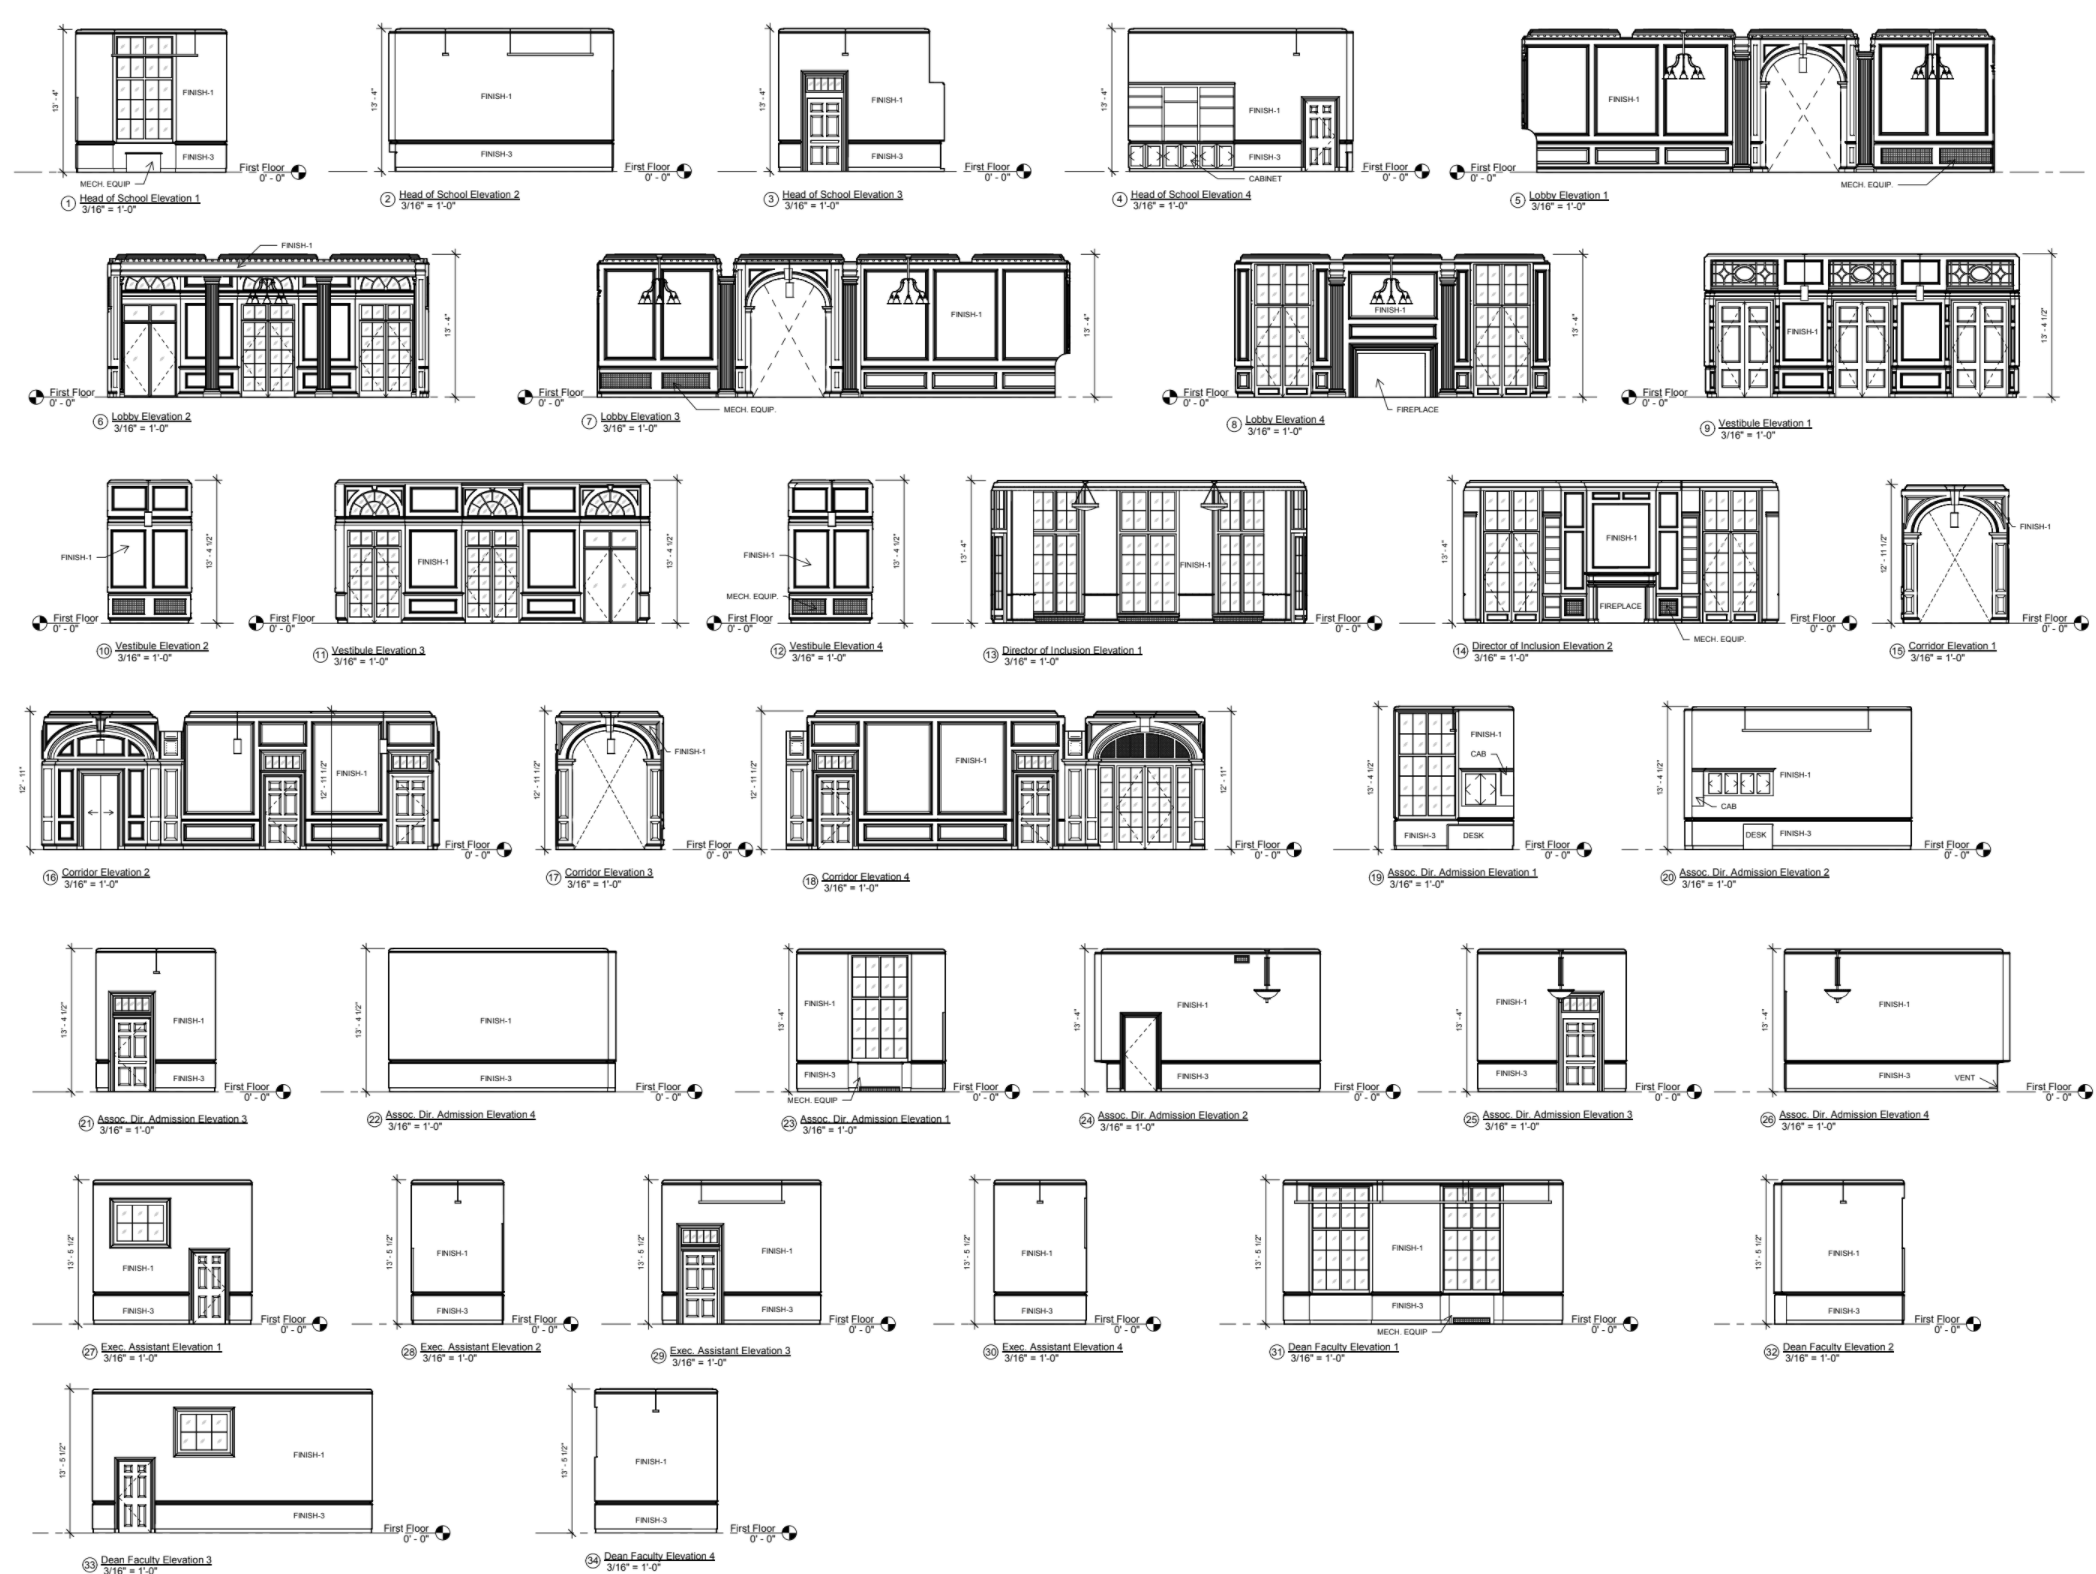 Technical Drawing: Elevations and Sections